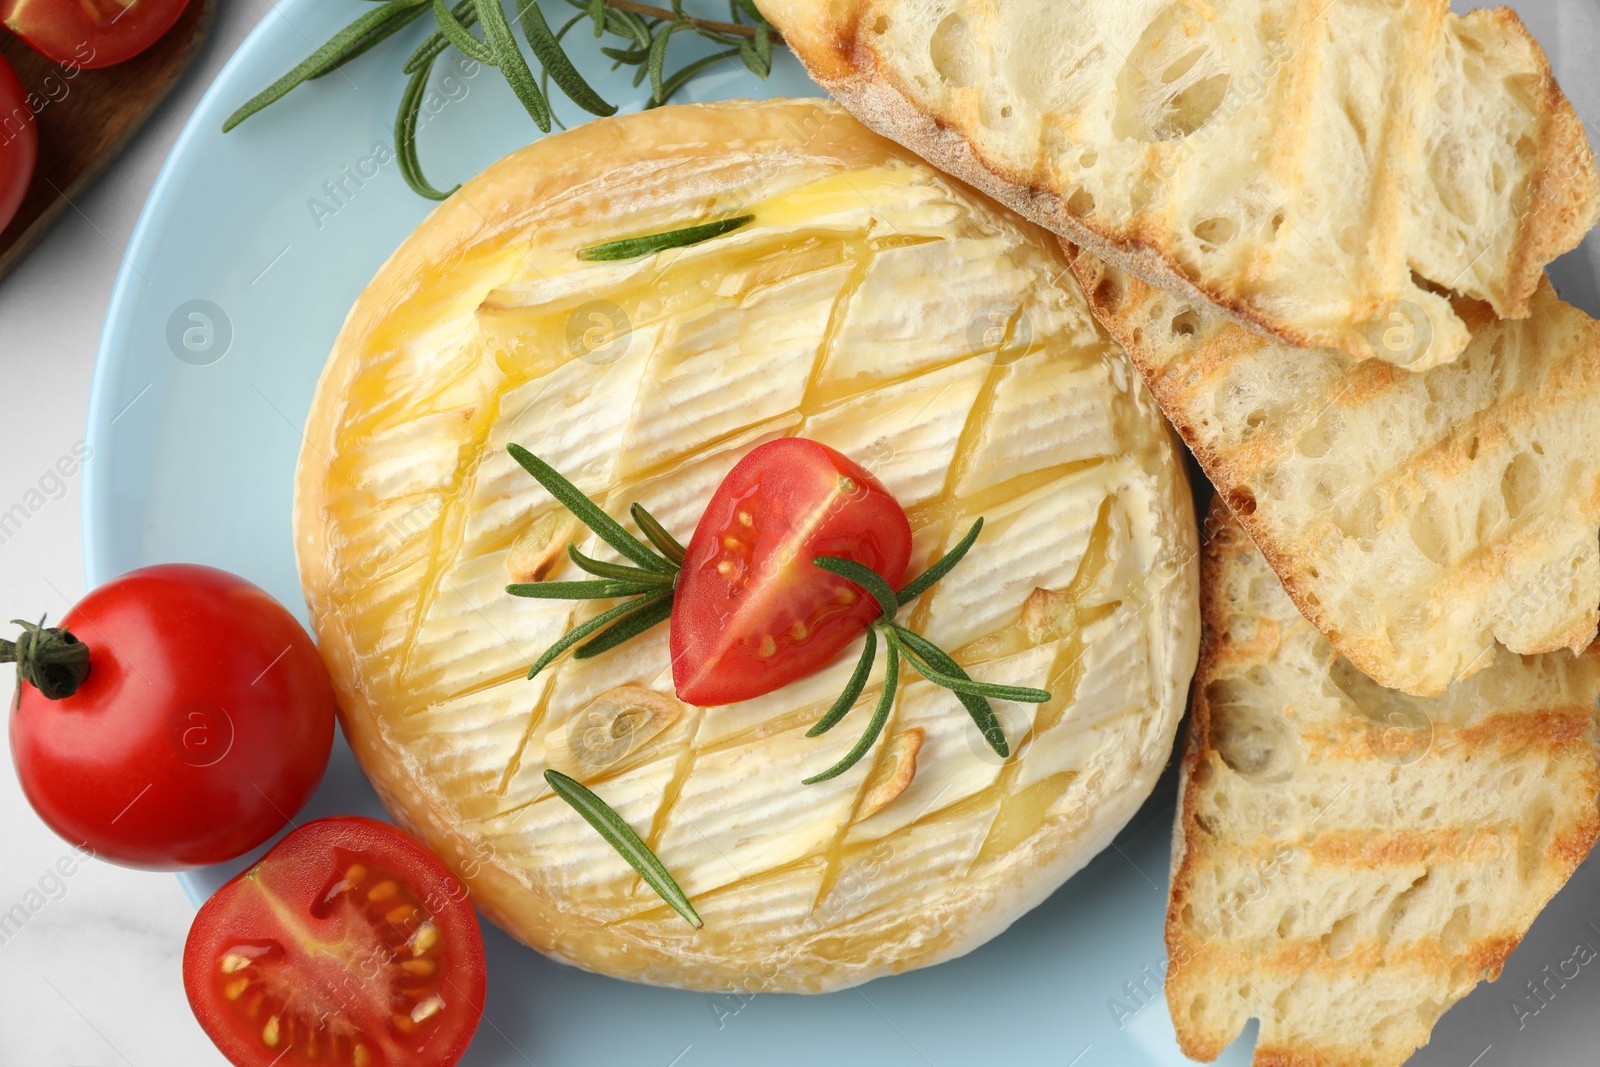 Photo of Tasty baked brie cheese with rosemary, cherry tomatoes and bread on plate, top view